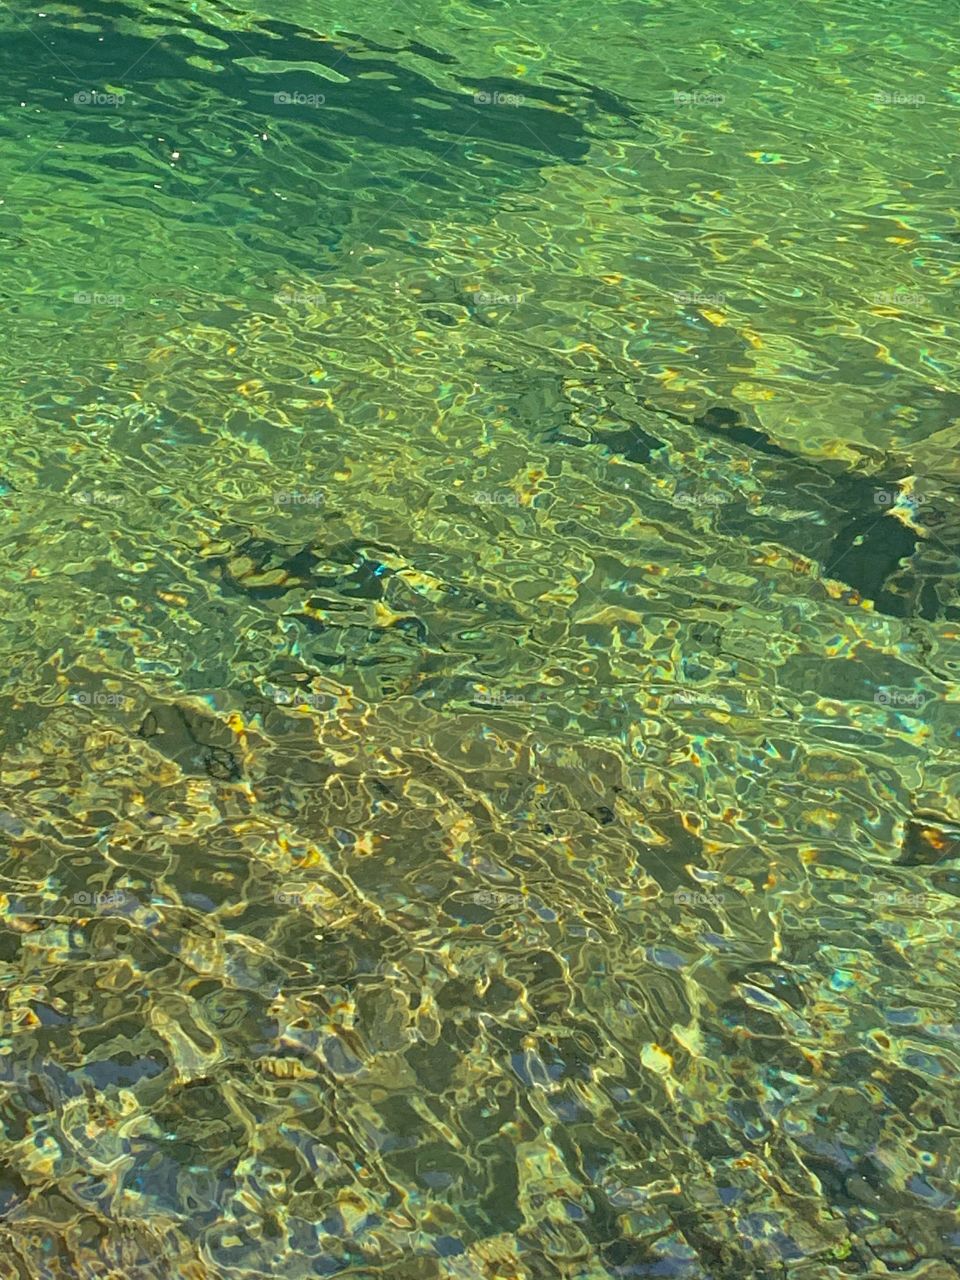 Allouette Lake Crystal Clear Water 